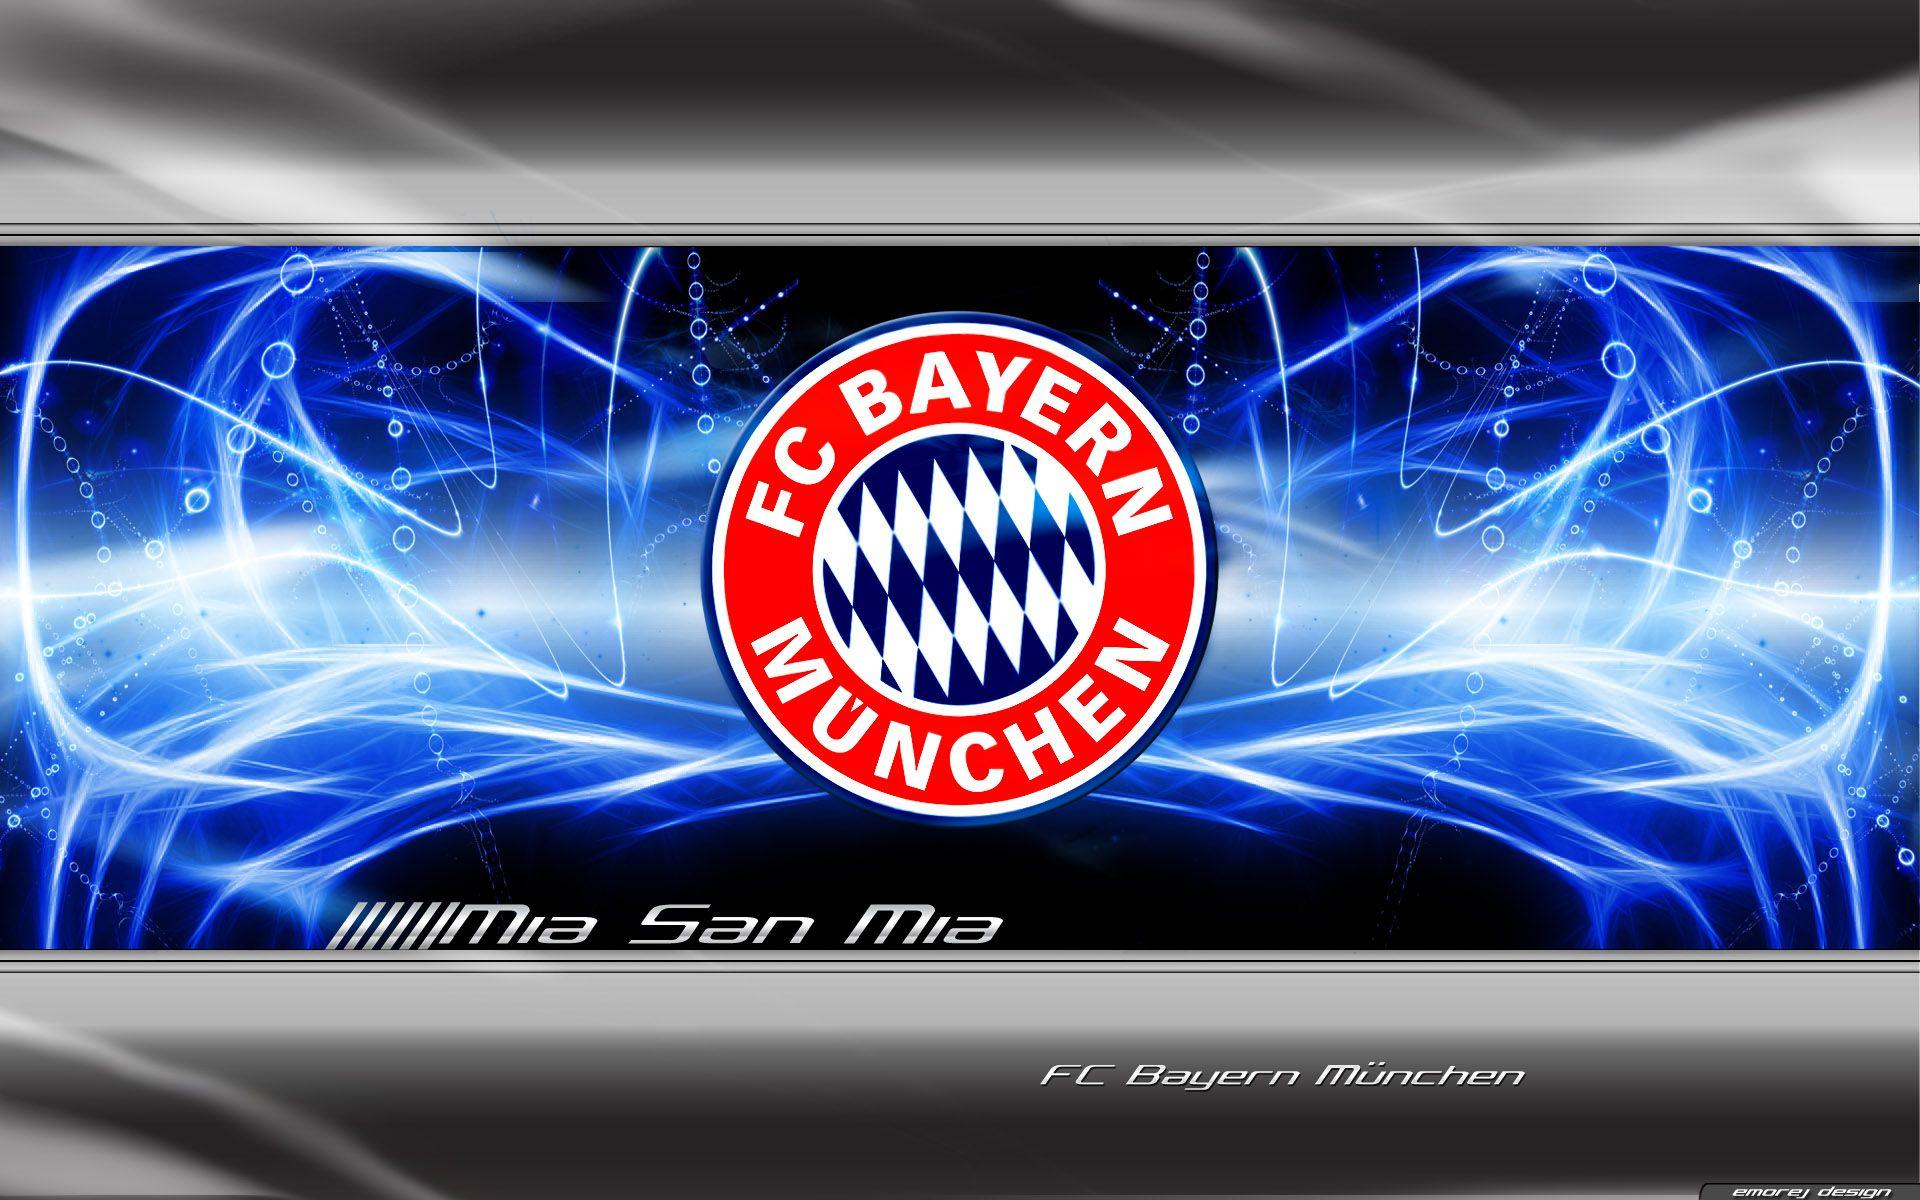 Bayern Munchen Wallpaper for Android